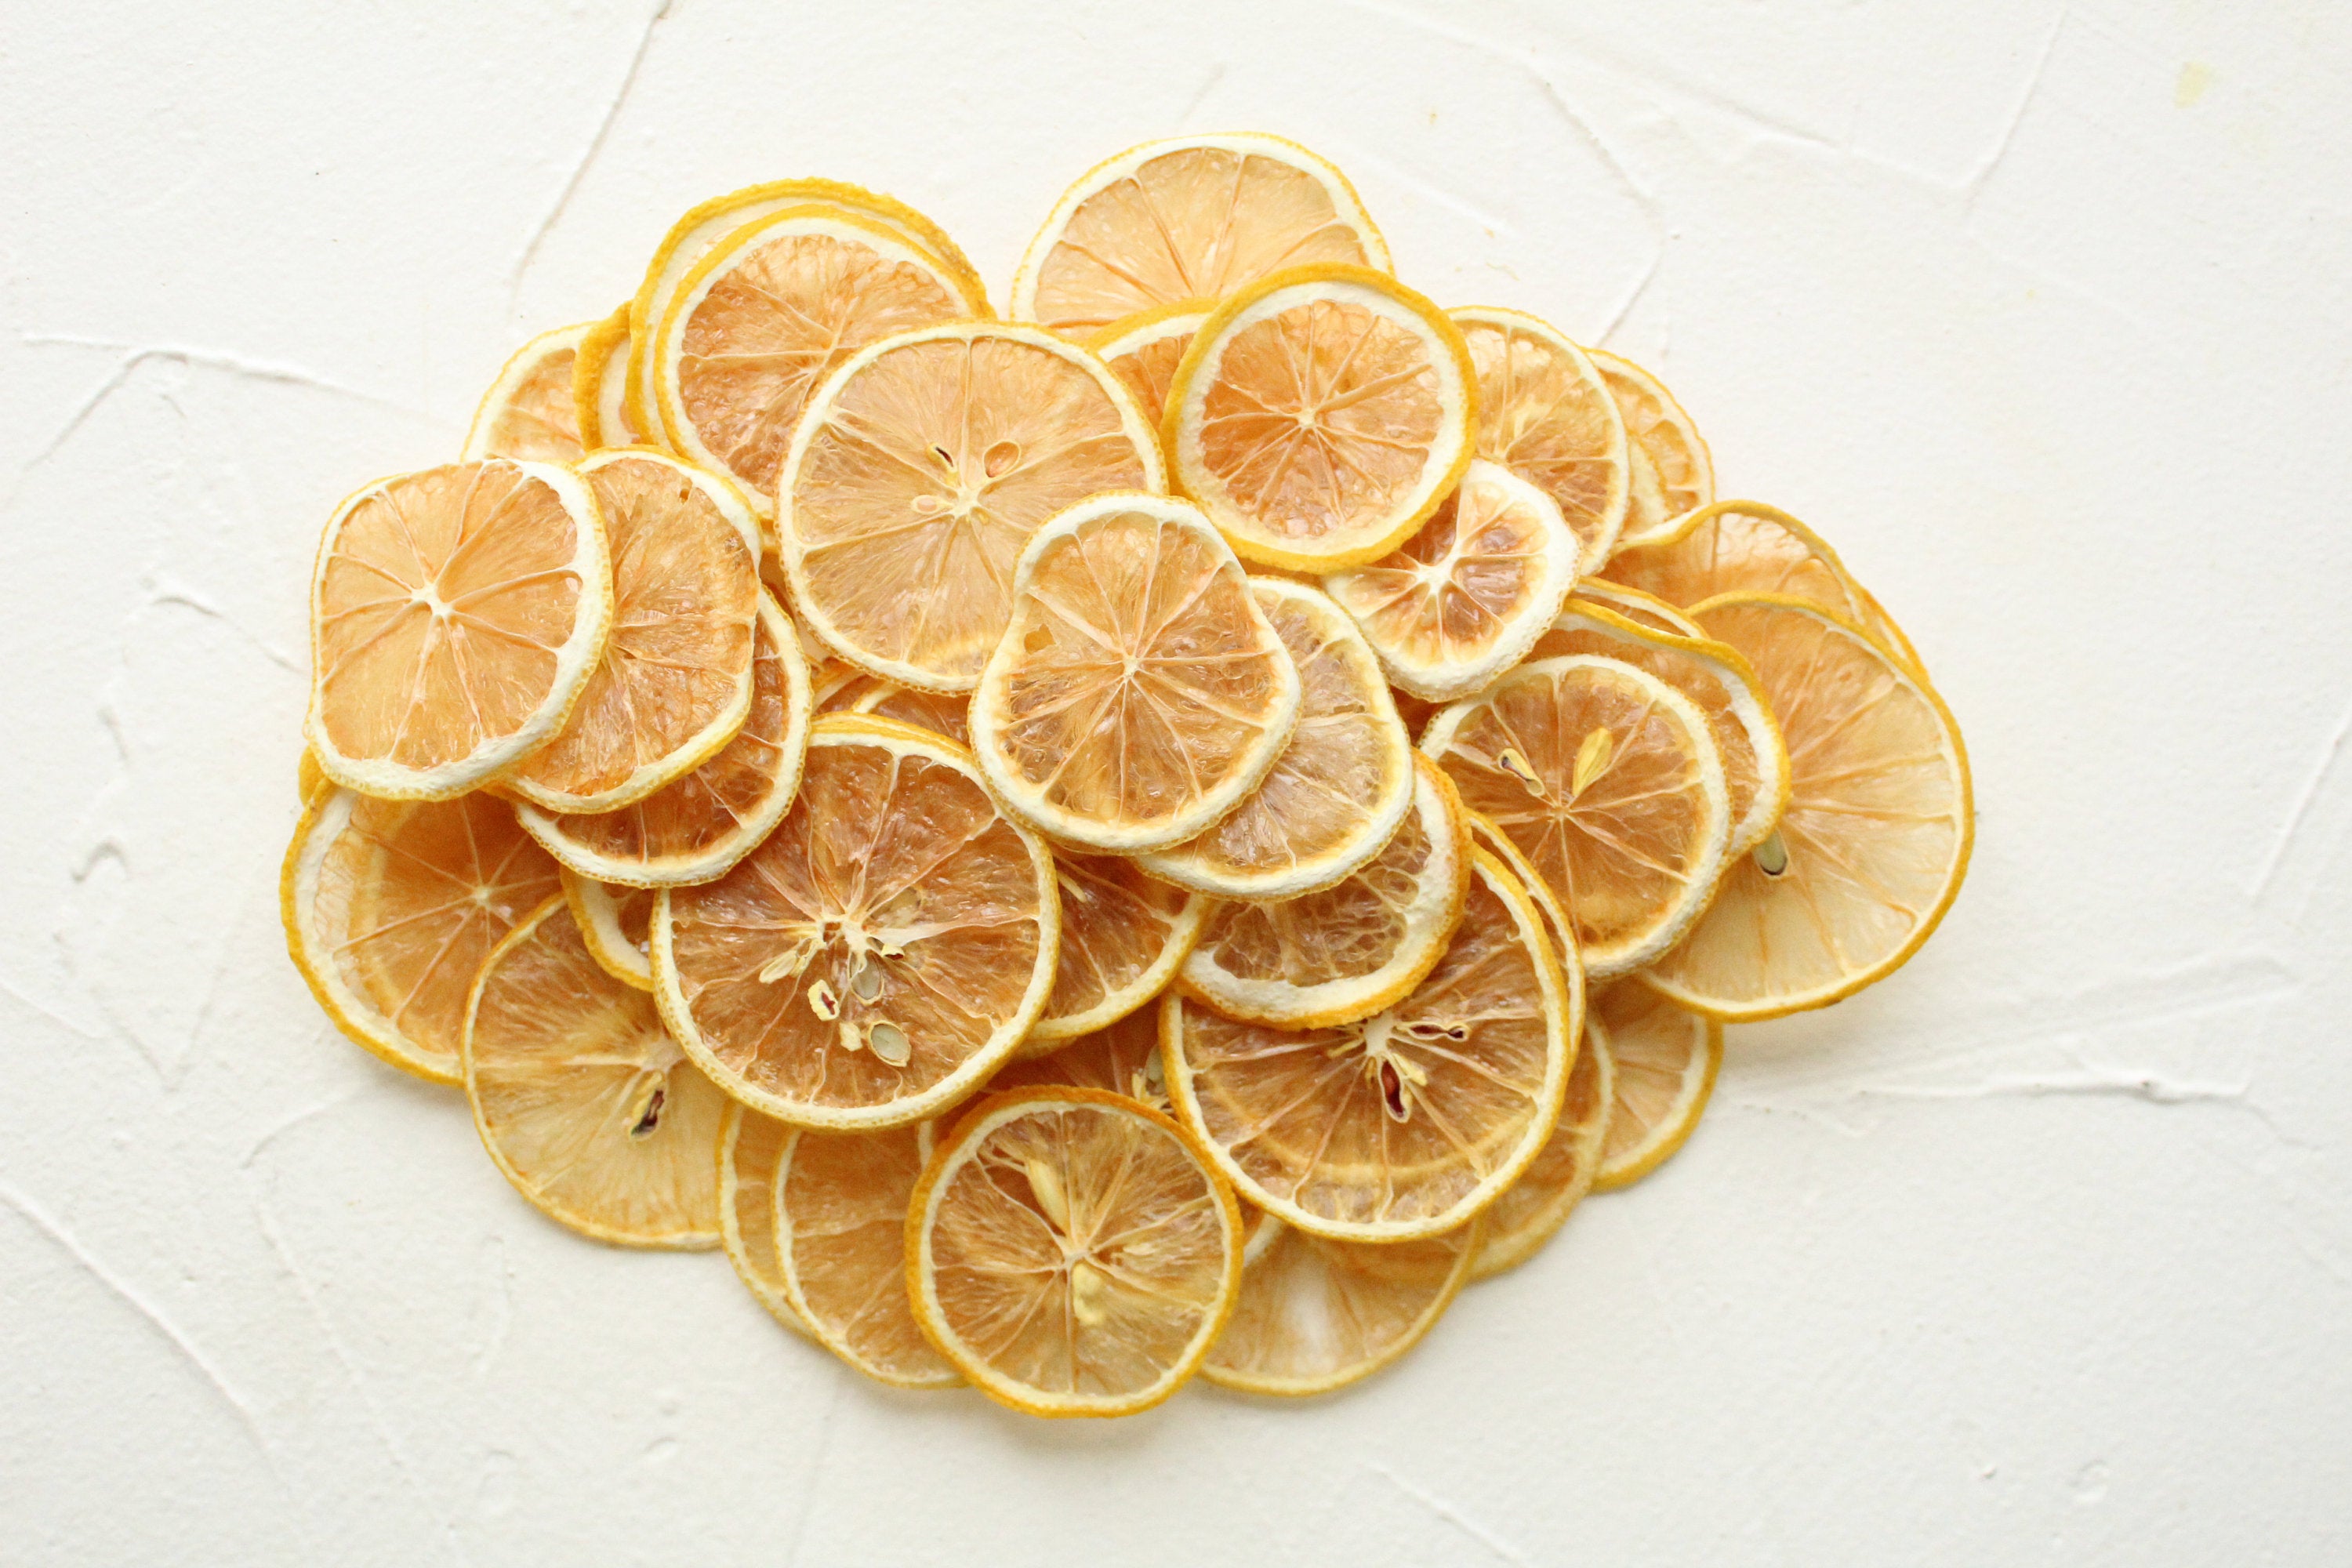 10 pcs of Dried Organic Homemade Lemon Slices, Air Dried, No Preservatives, Colors and Artificial Additives